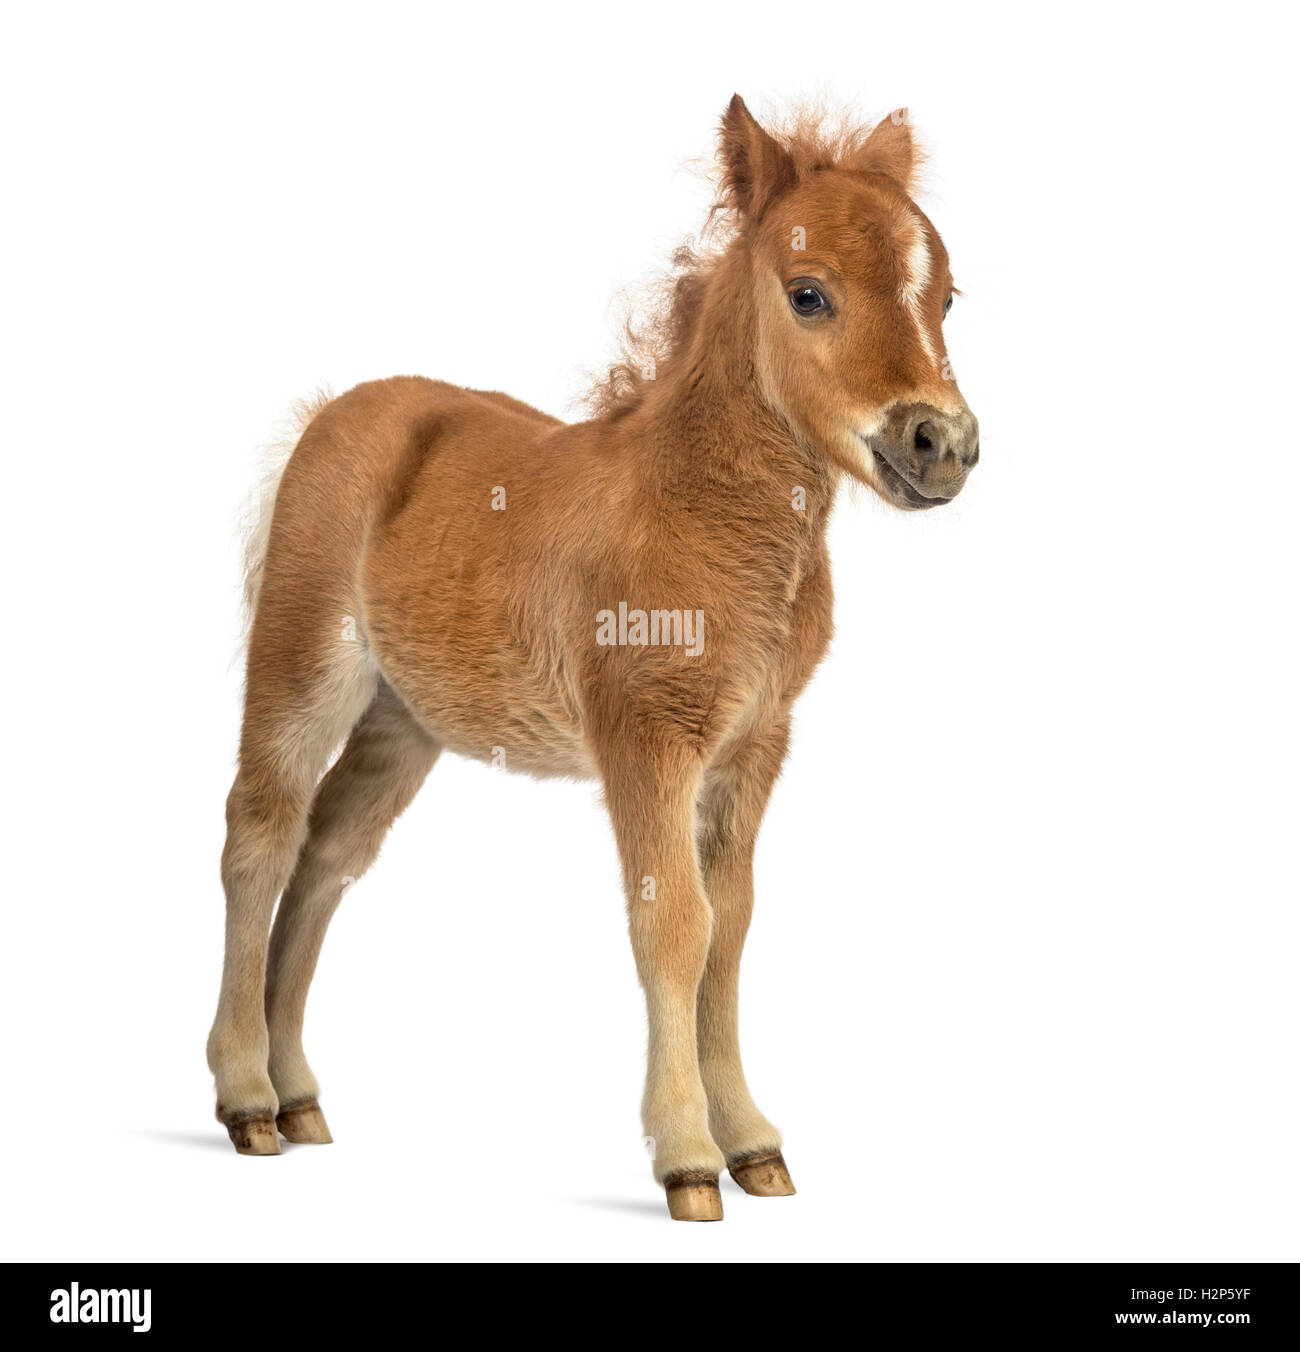 Side view of a young poney, foal looking at the camera against white background Stock Photo